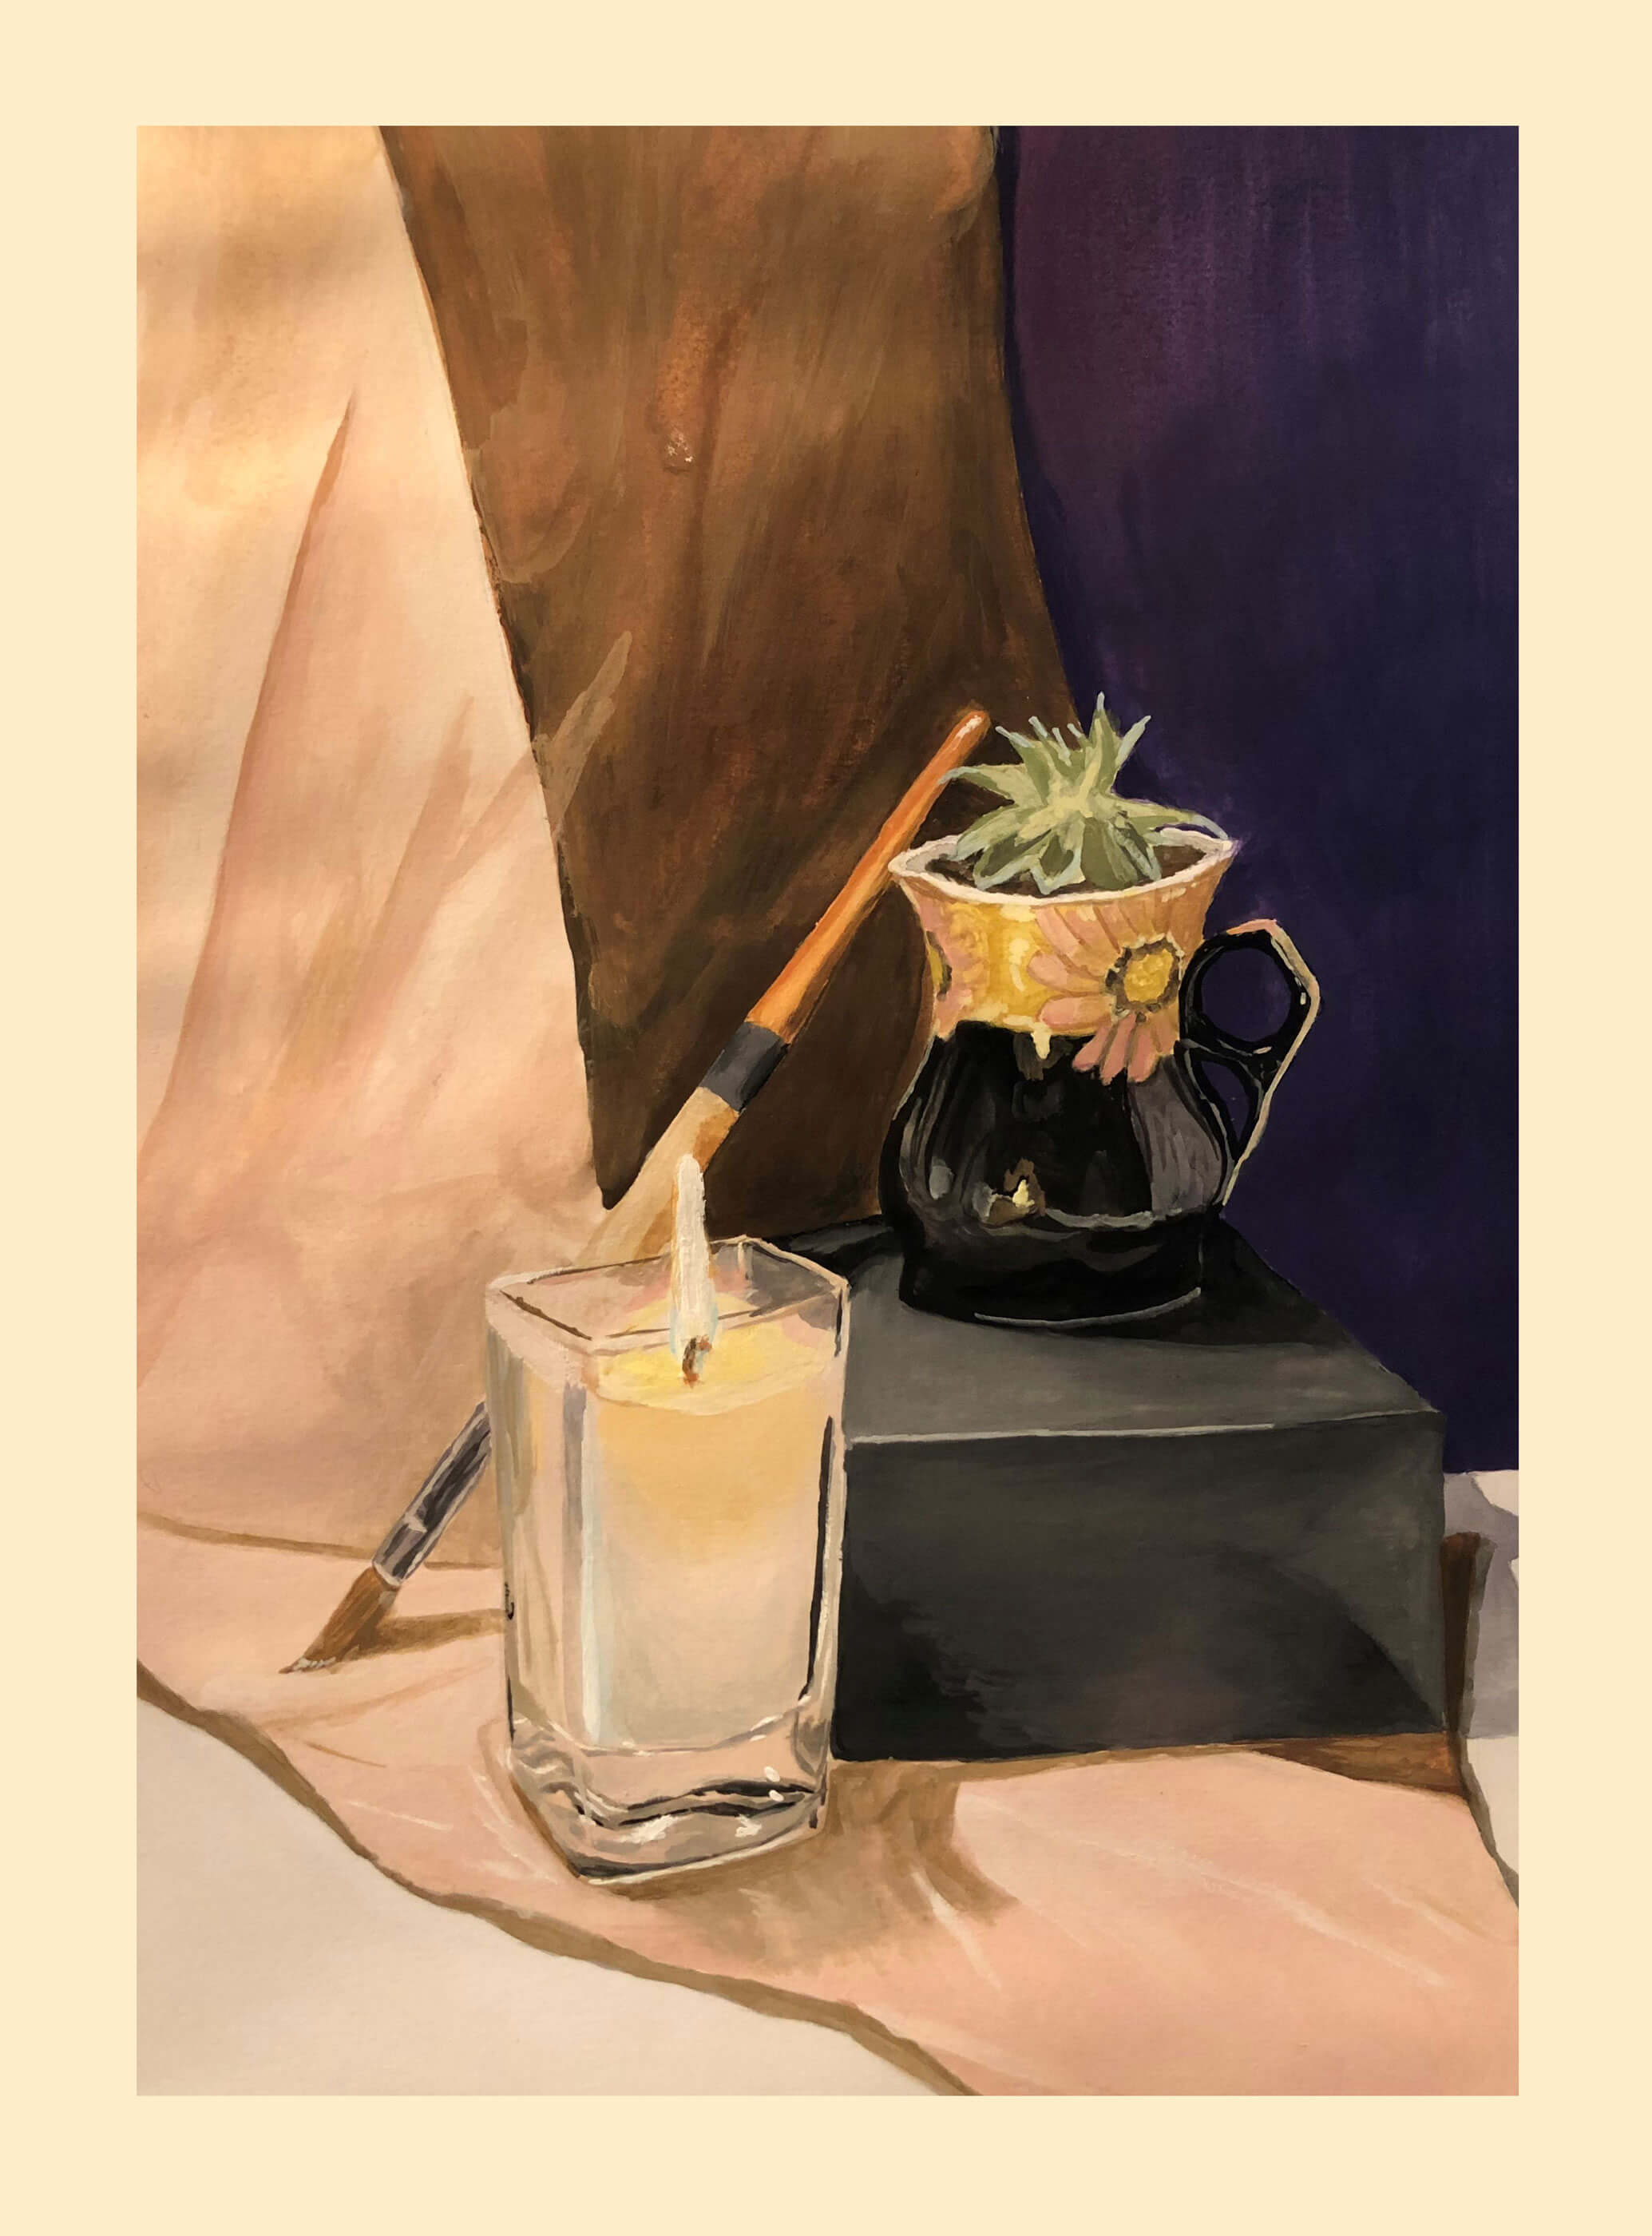 Painting of a candle, paintbrush, and cup with a plant in it.